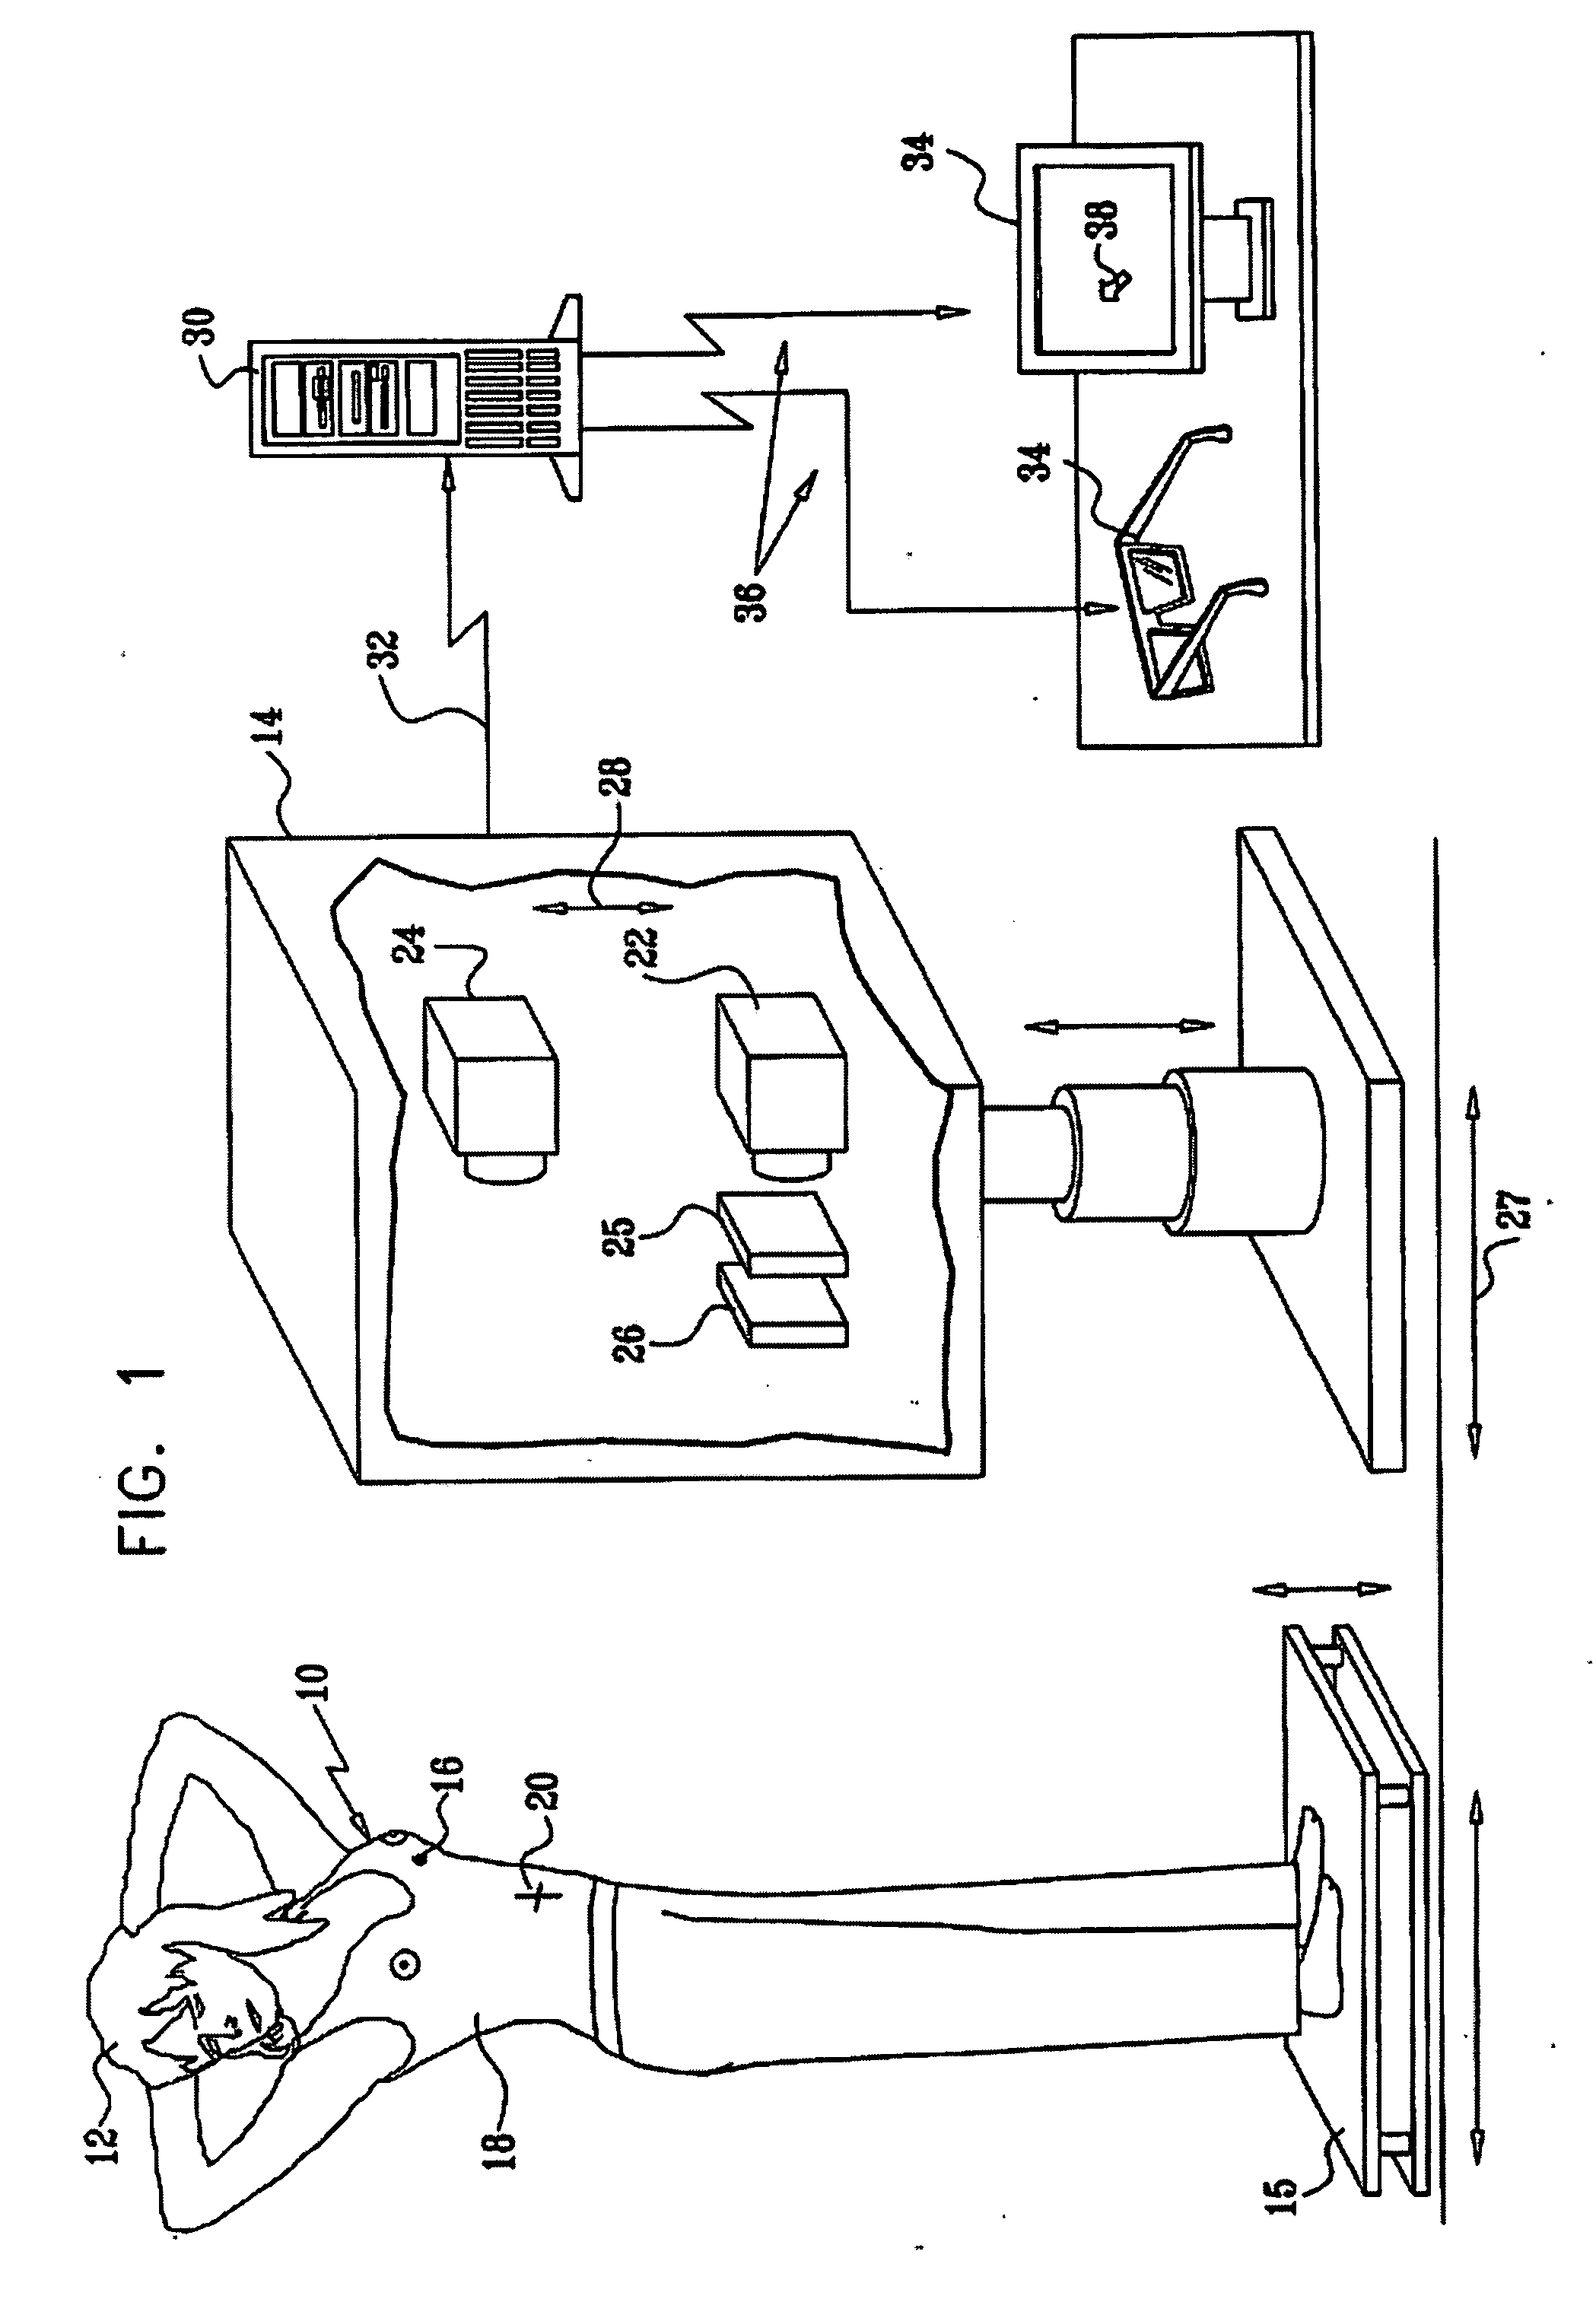 System and method for imaging